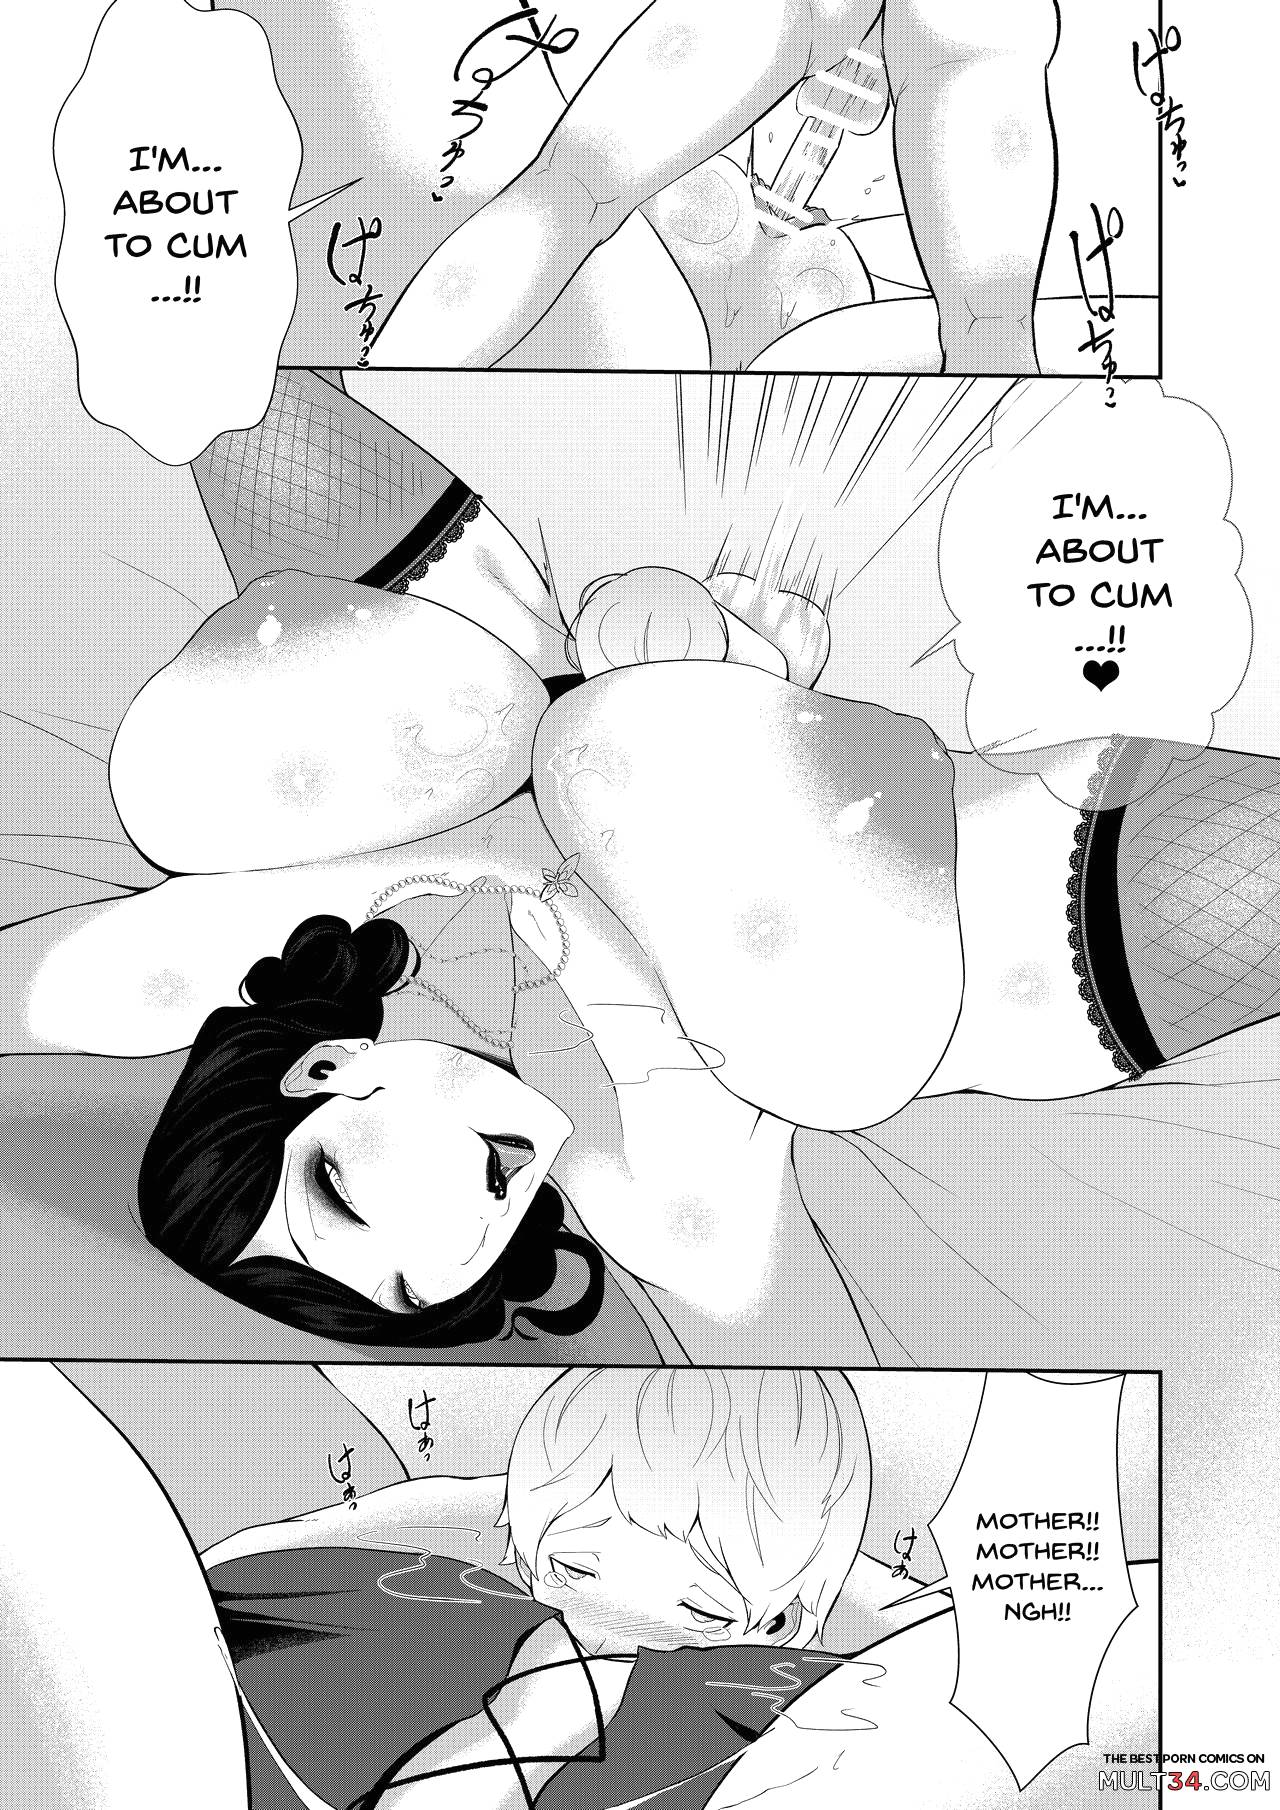 Dimitrescu-sama's Squeezing Out Your Sperm page 30